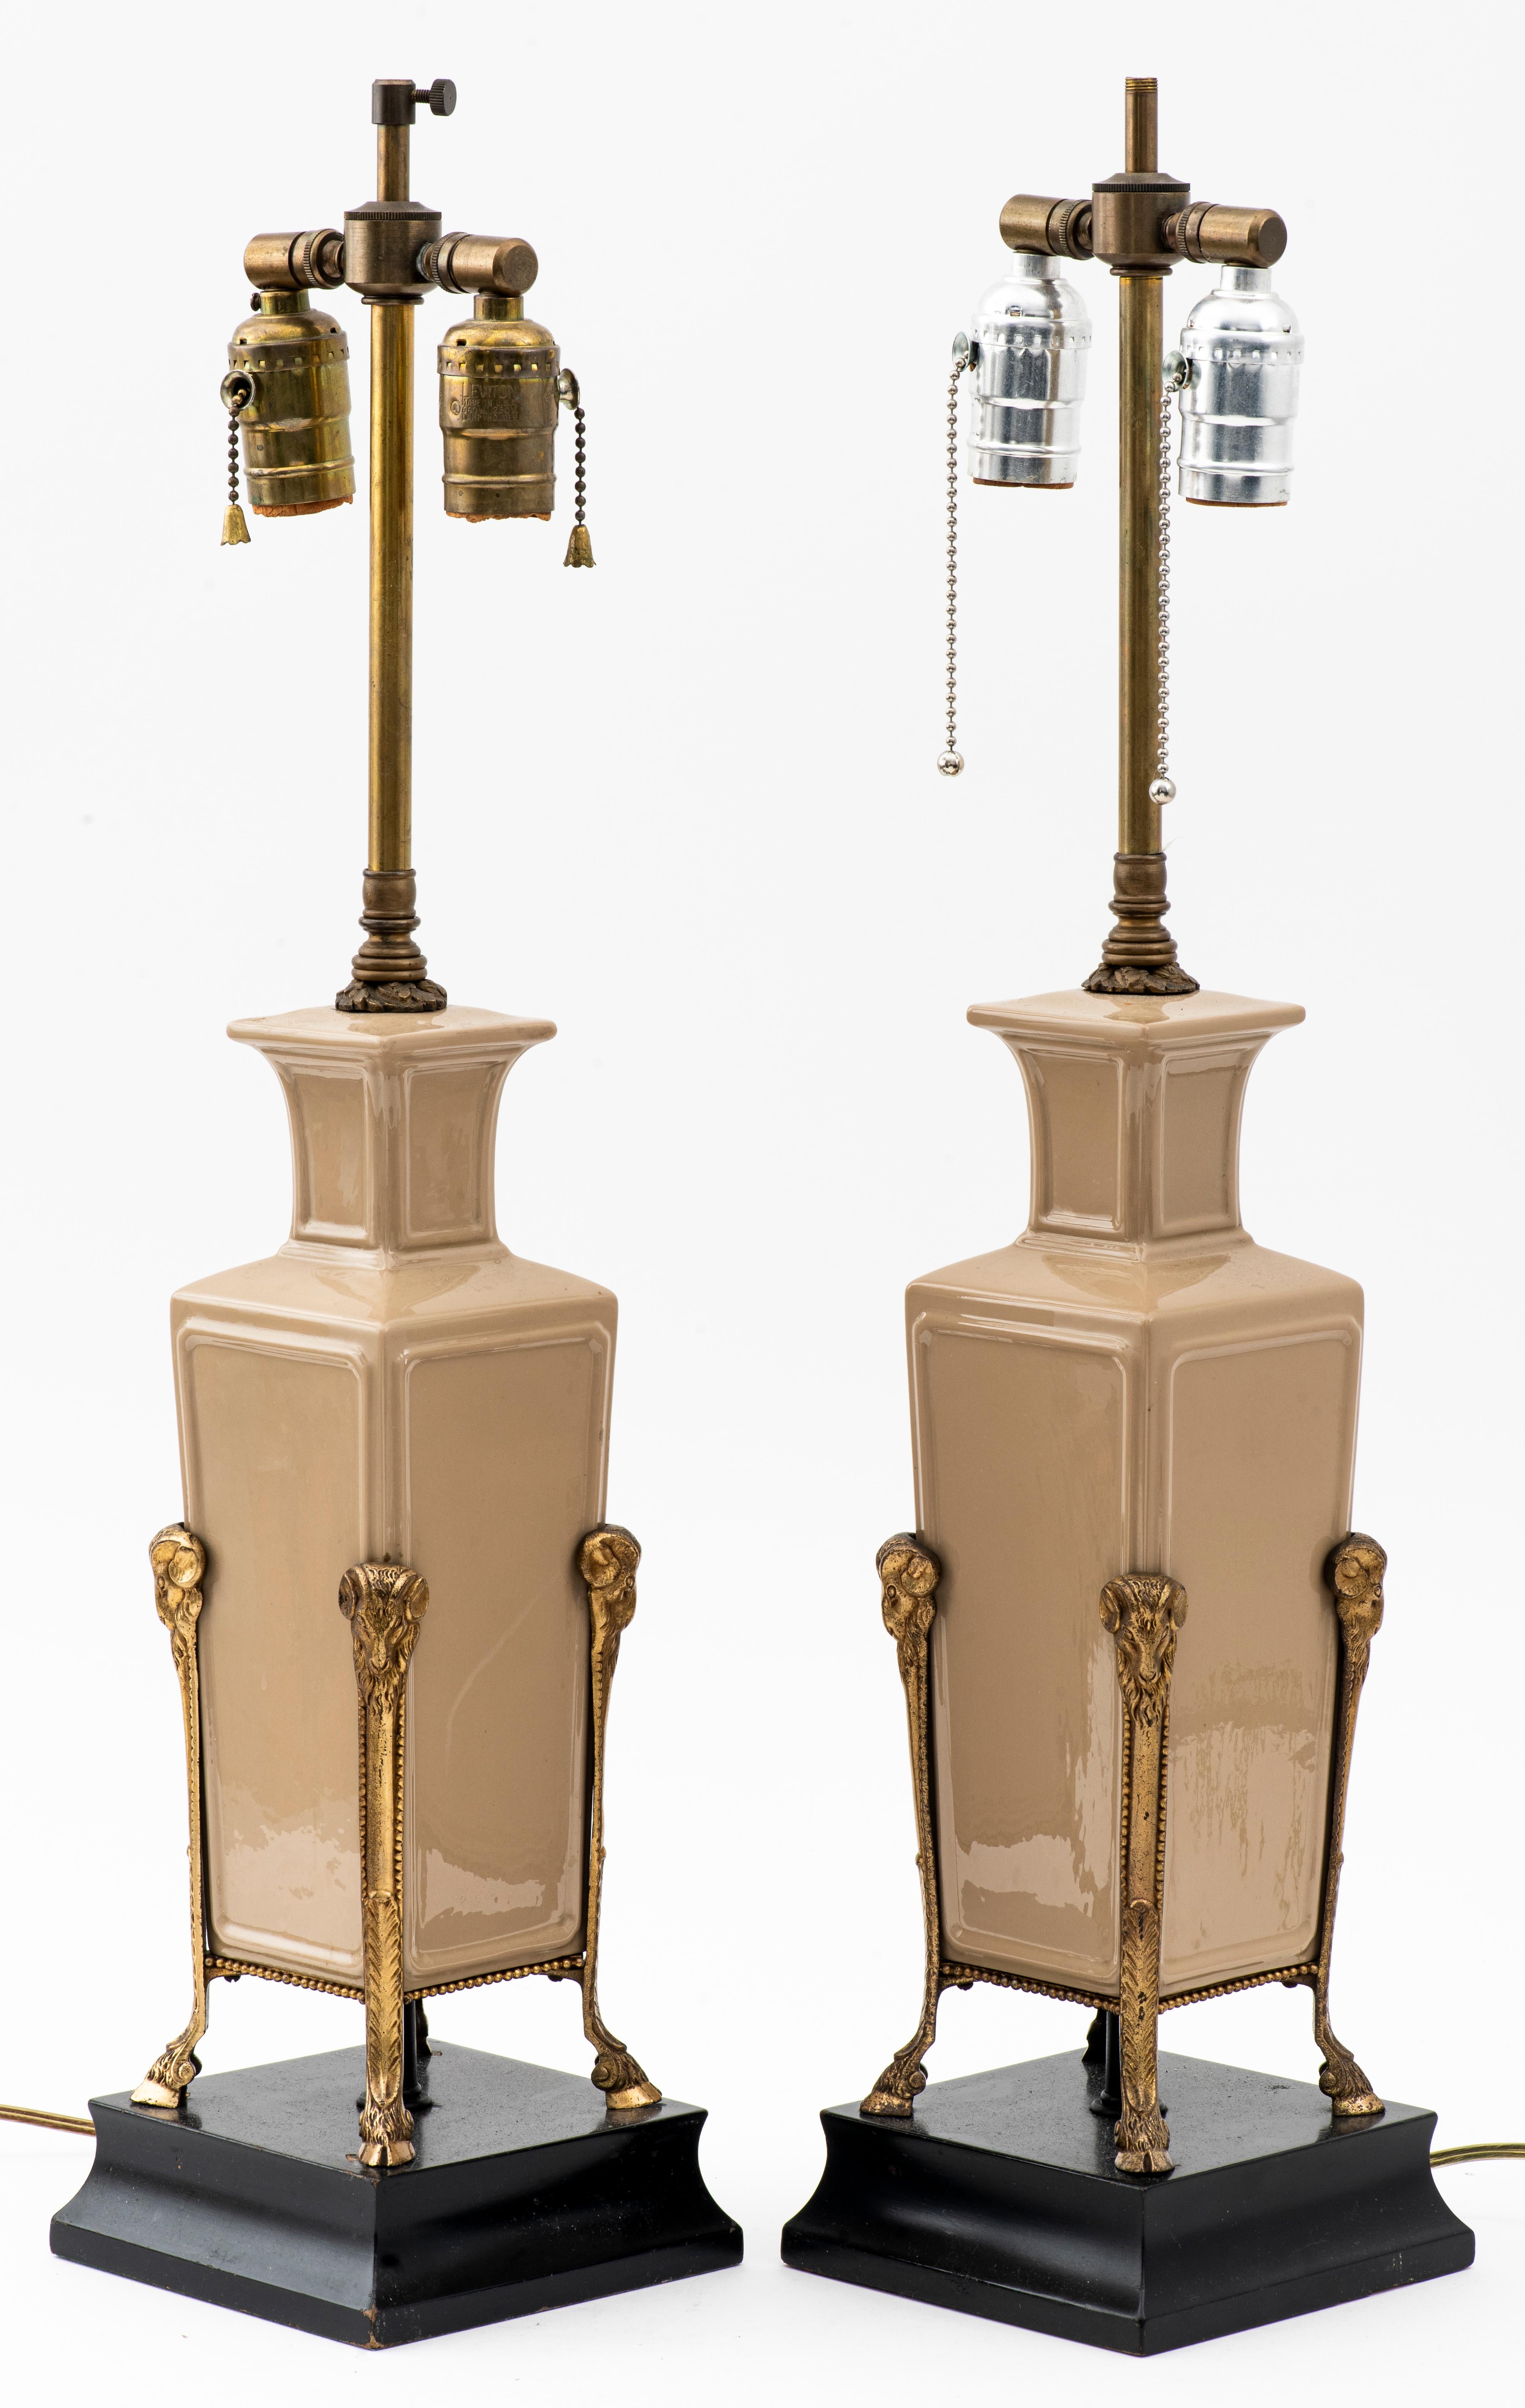 Neoclassical Revival pair of table lamps with beige ceramic vases mounted on metal stand with ibex heads and hoofed feet, mounted on ebonized square bases. Measures: 25.5